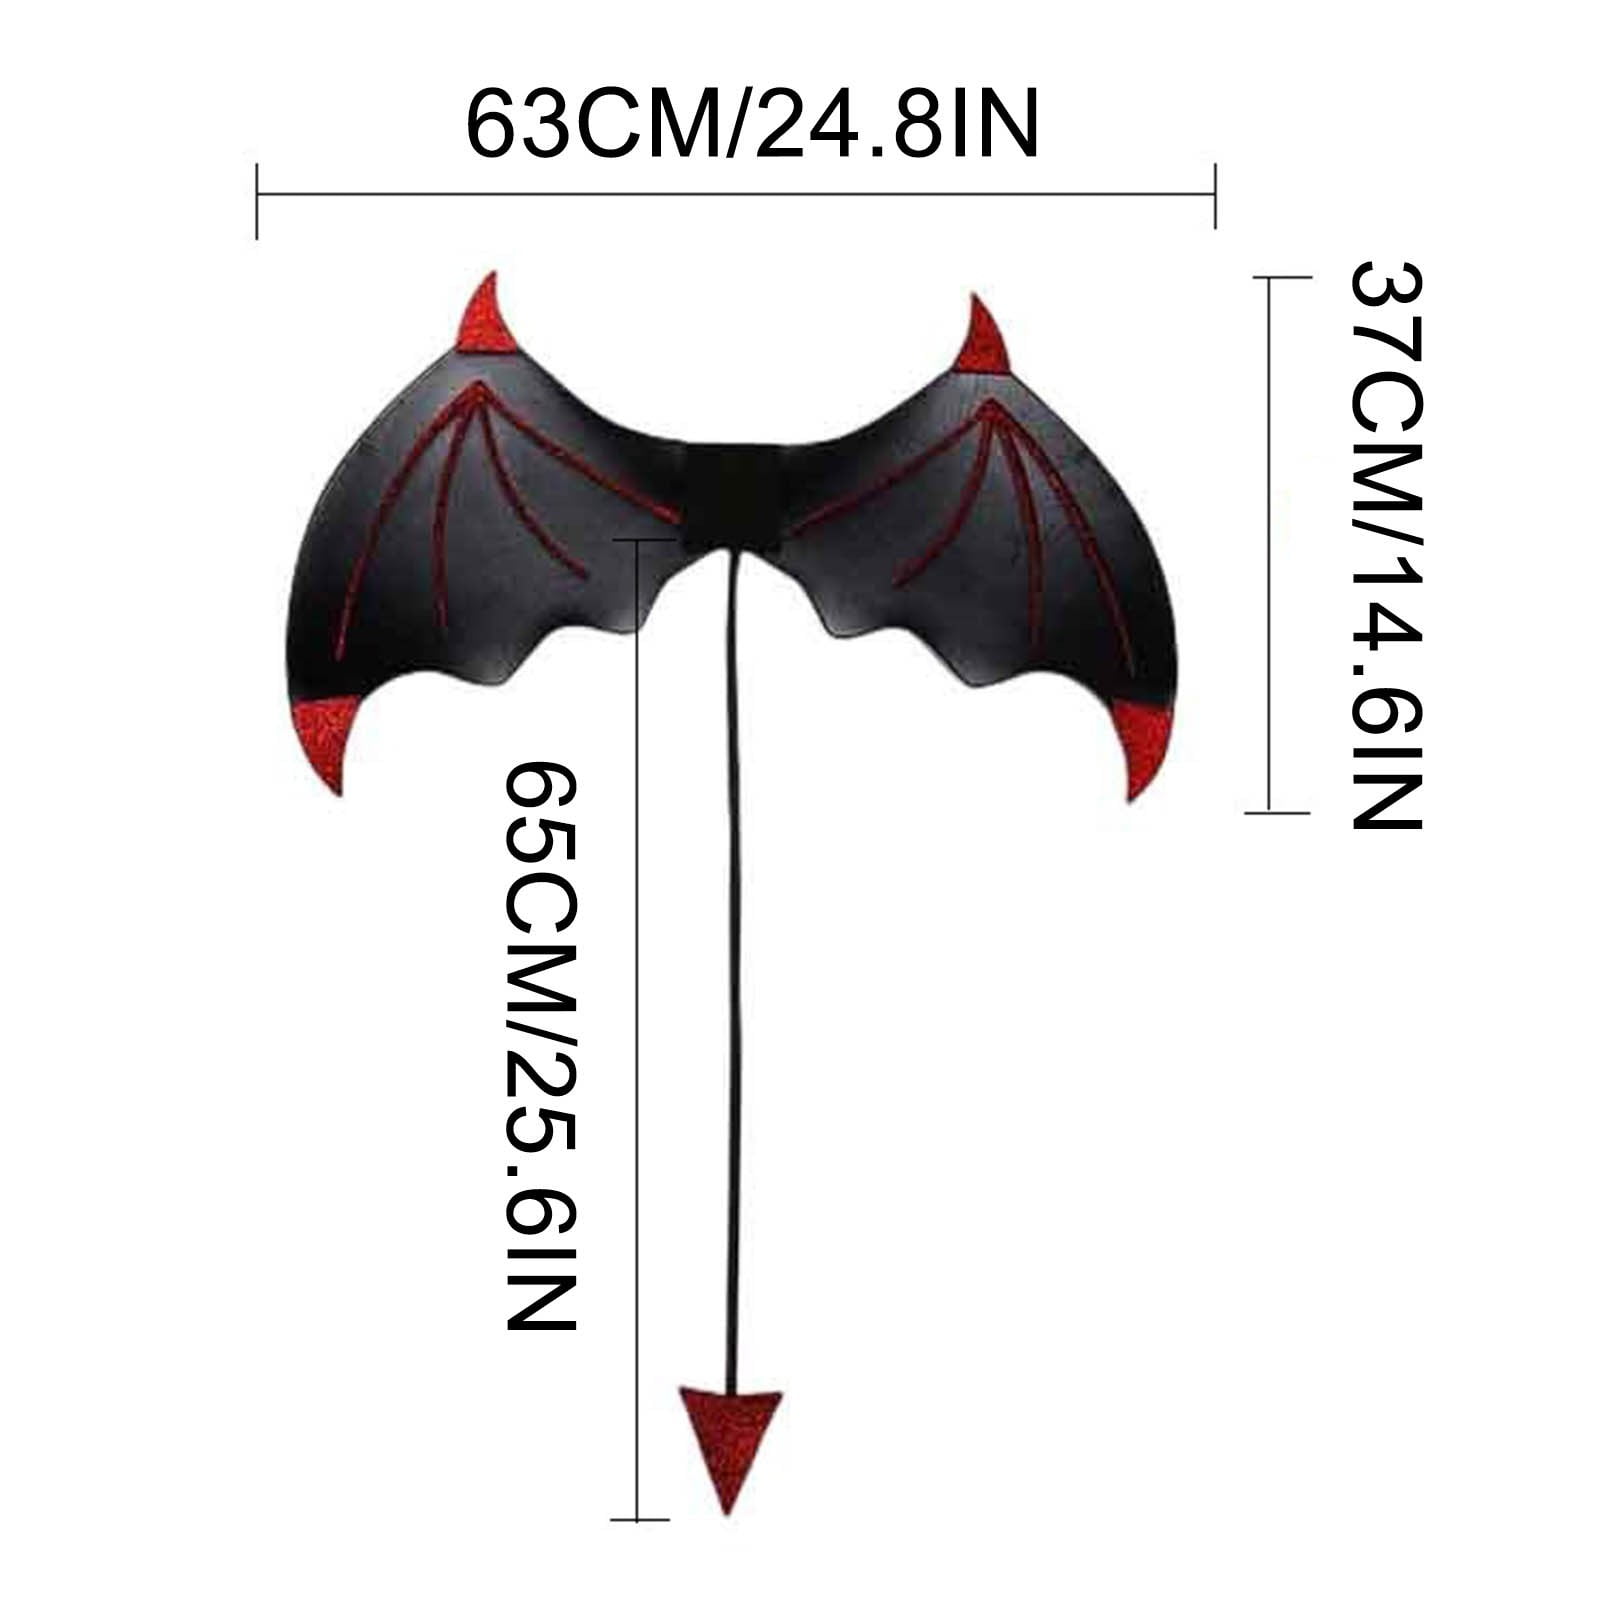  Kuscul 3 Pieces Halloween Devil Costume Set with Black Angel  Wings, Black Devil Pitchfork and Devil Horn Headband for Kids Party  Children's Halloween Cosplay Party : Toys & Games